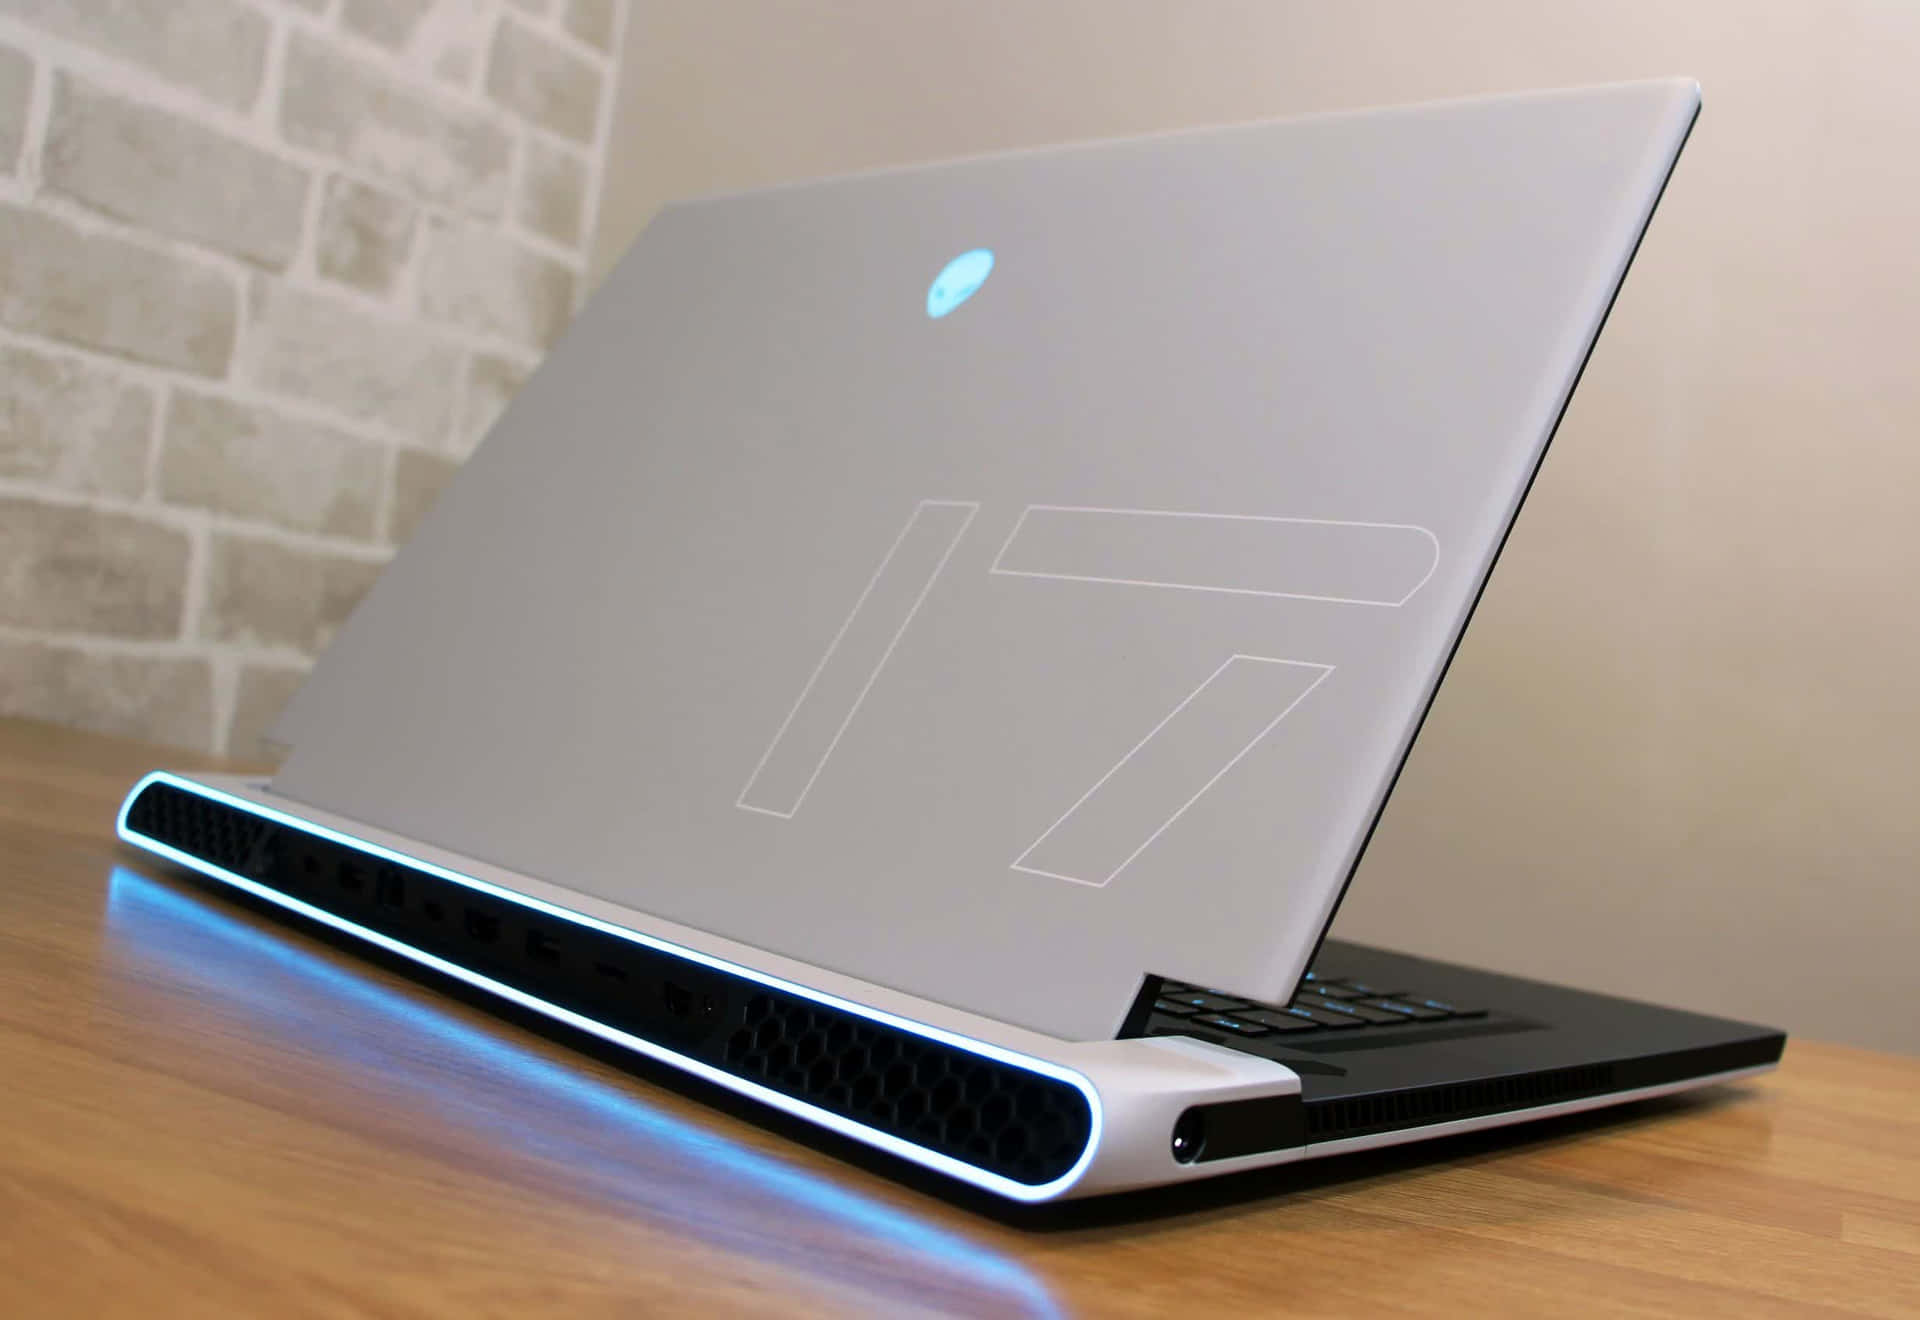 Take your gaming experience to the next level with Alienware's impressive high-resolution performance